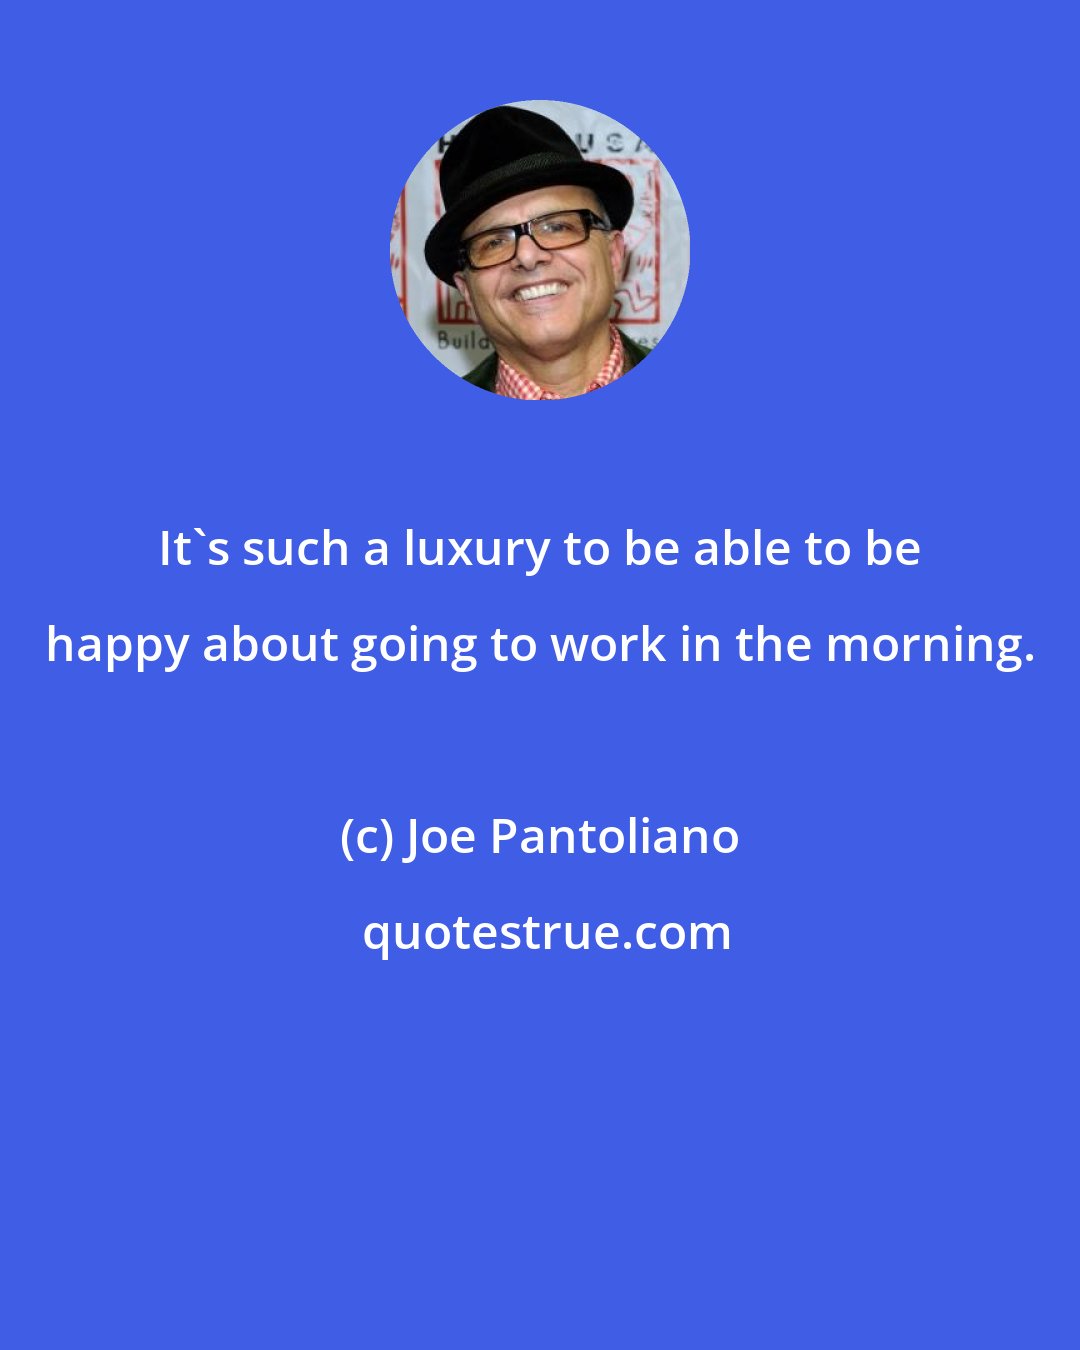 Joe Pantoliano: It's such a luxury to be able to be happy about going to work in the morning.